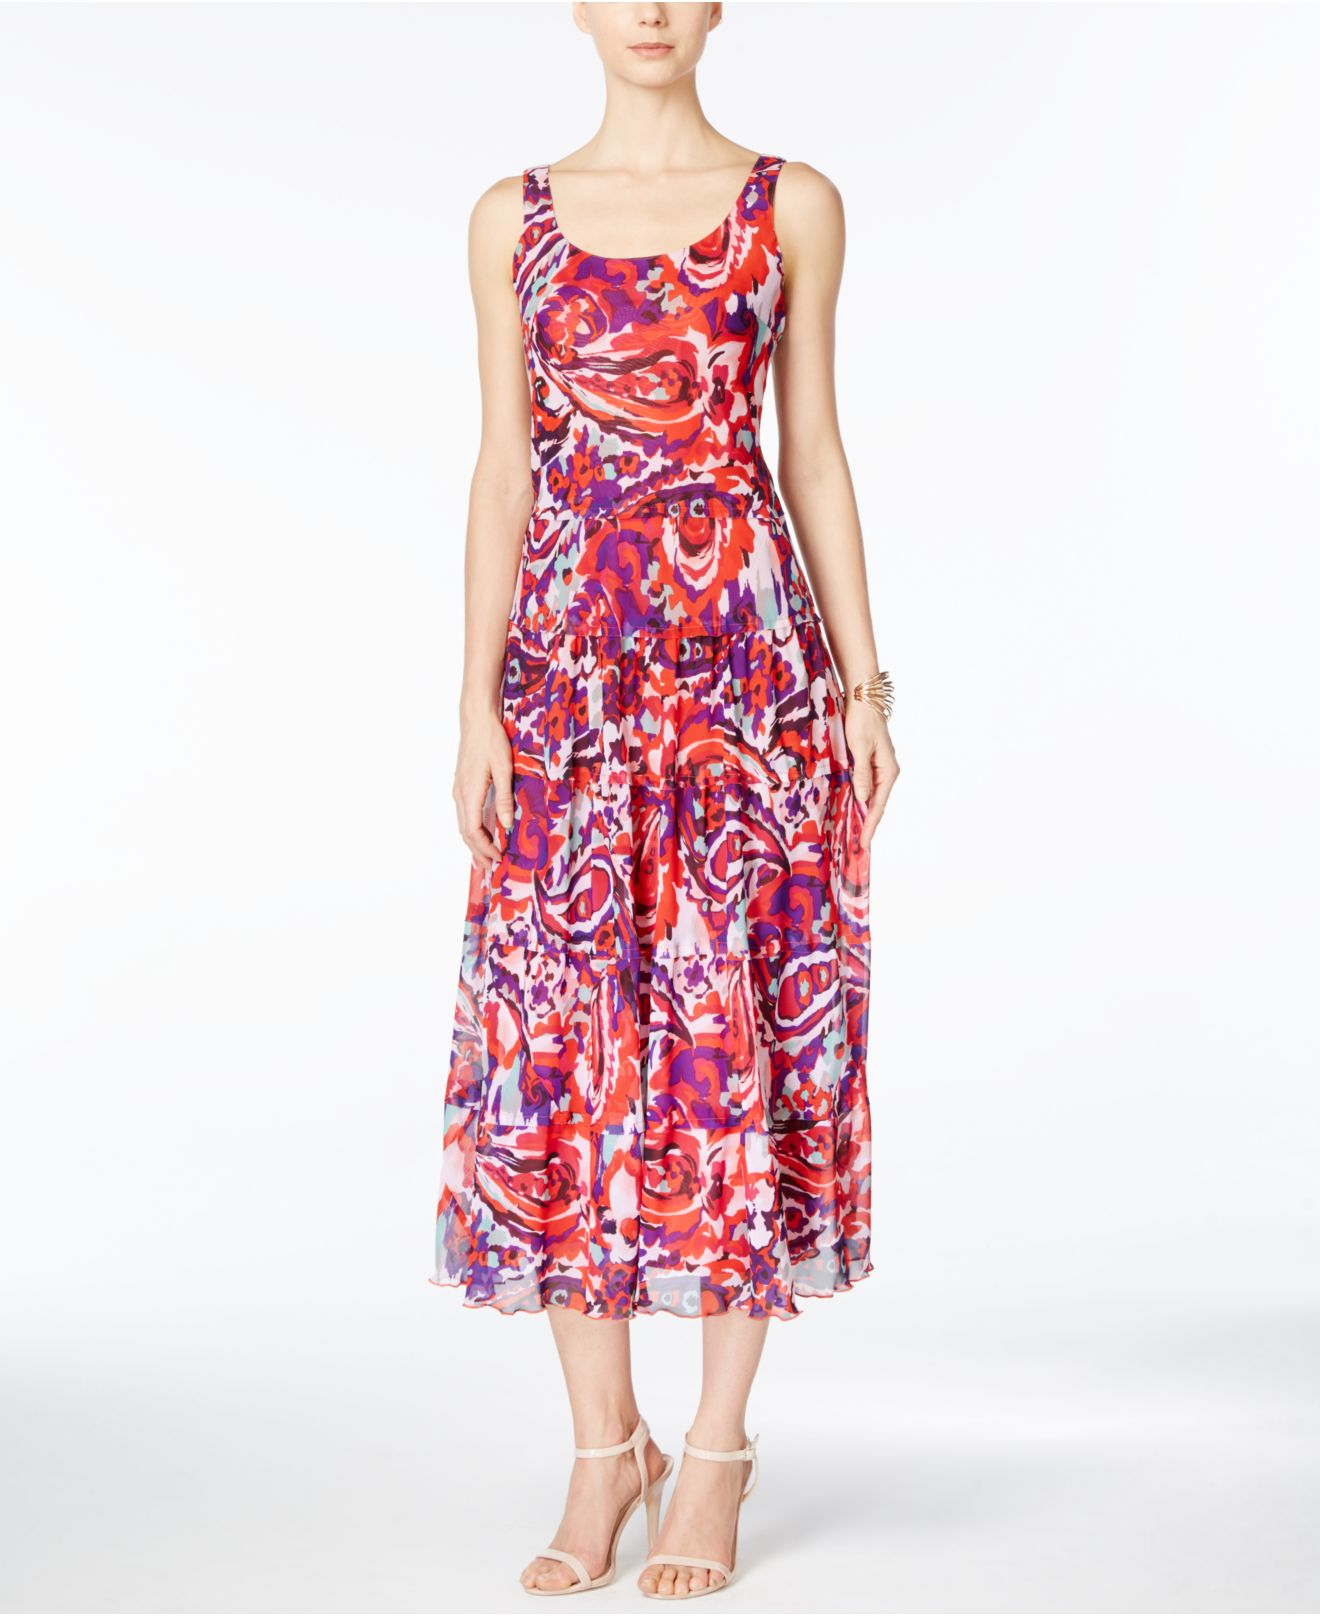 nine west sleeveless floral printed maxi dres